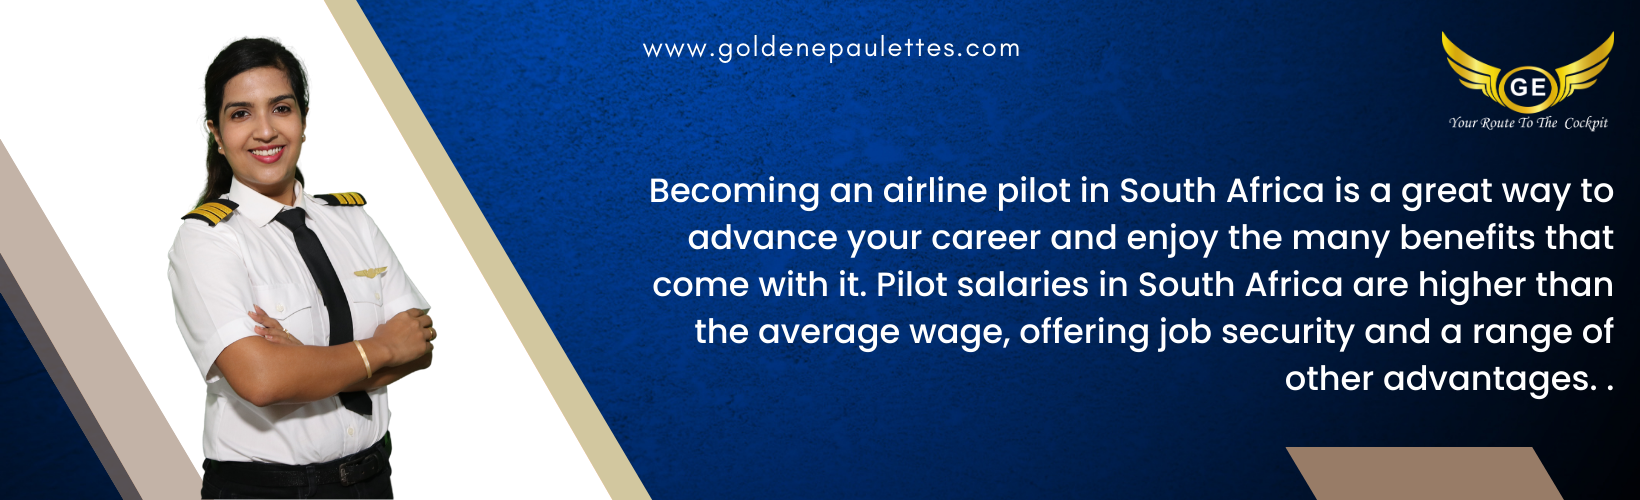 The Benefits of Becoming an Airline Pilot in South Africa